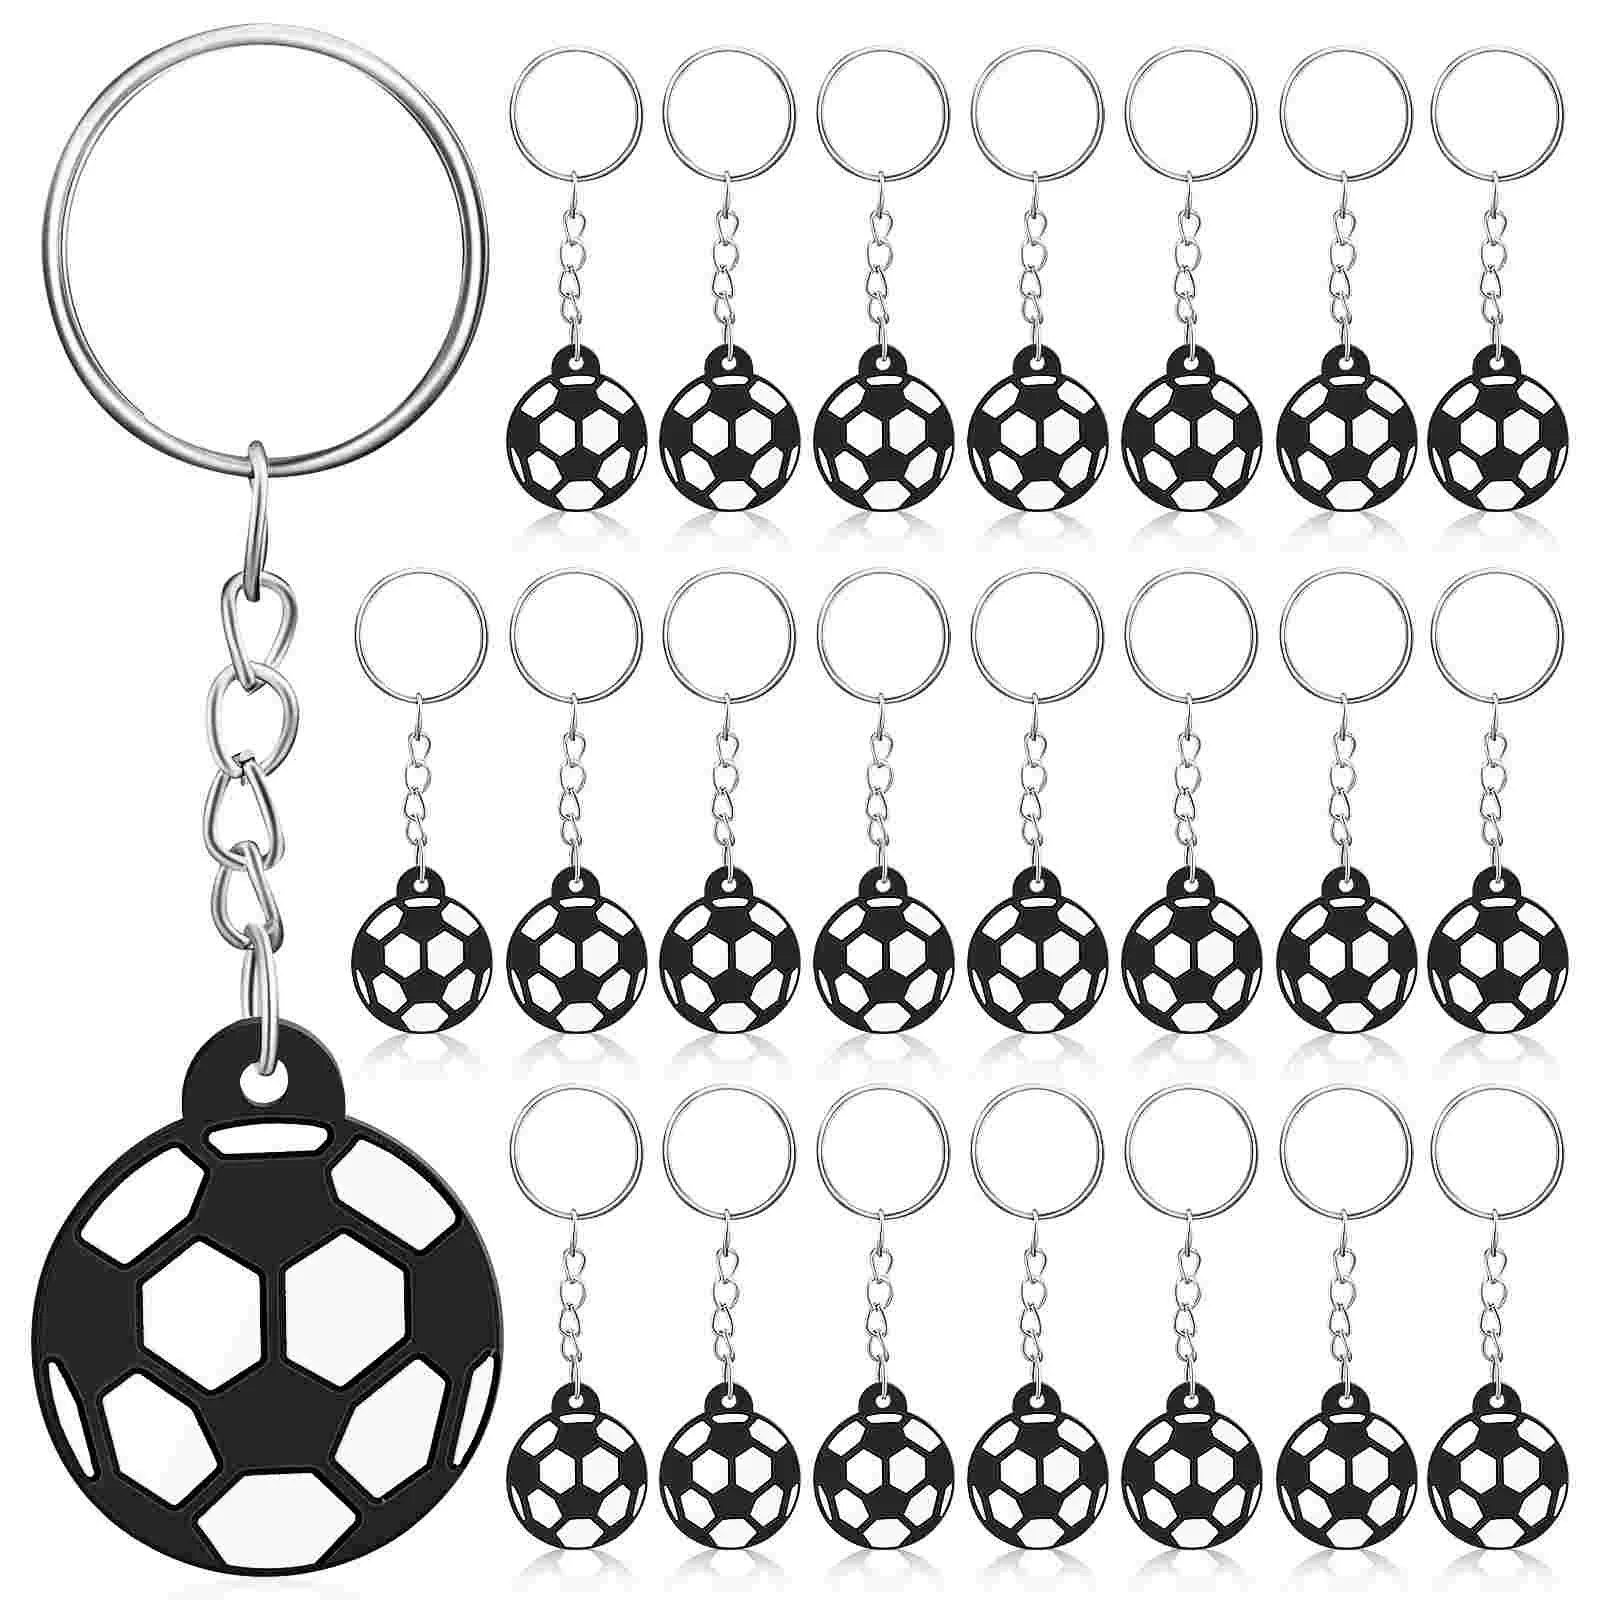 

Football Keychains Portable Keyrings With Soccer Pendants Party Favors Sport Keychains Carnival Game Reward Gifts